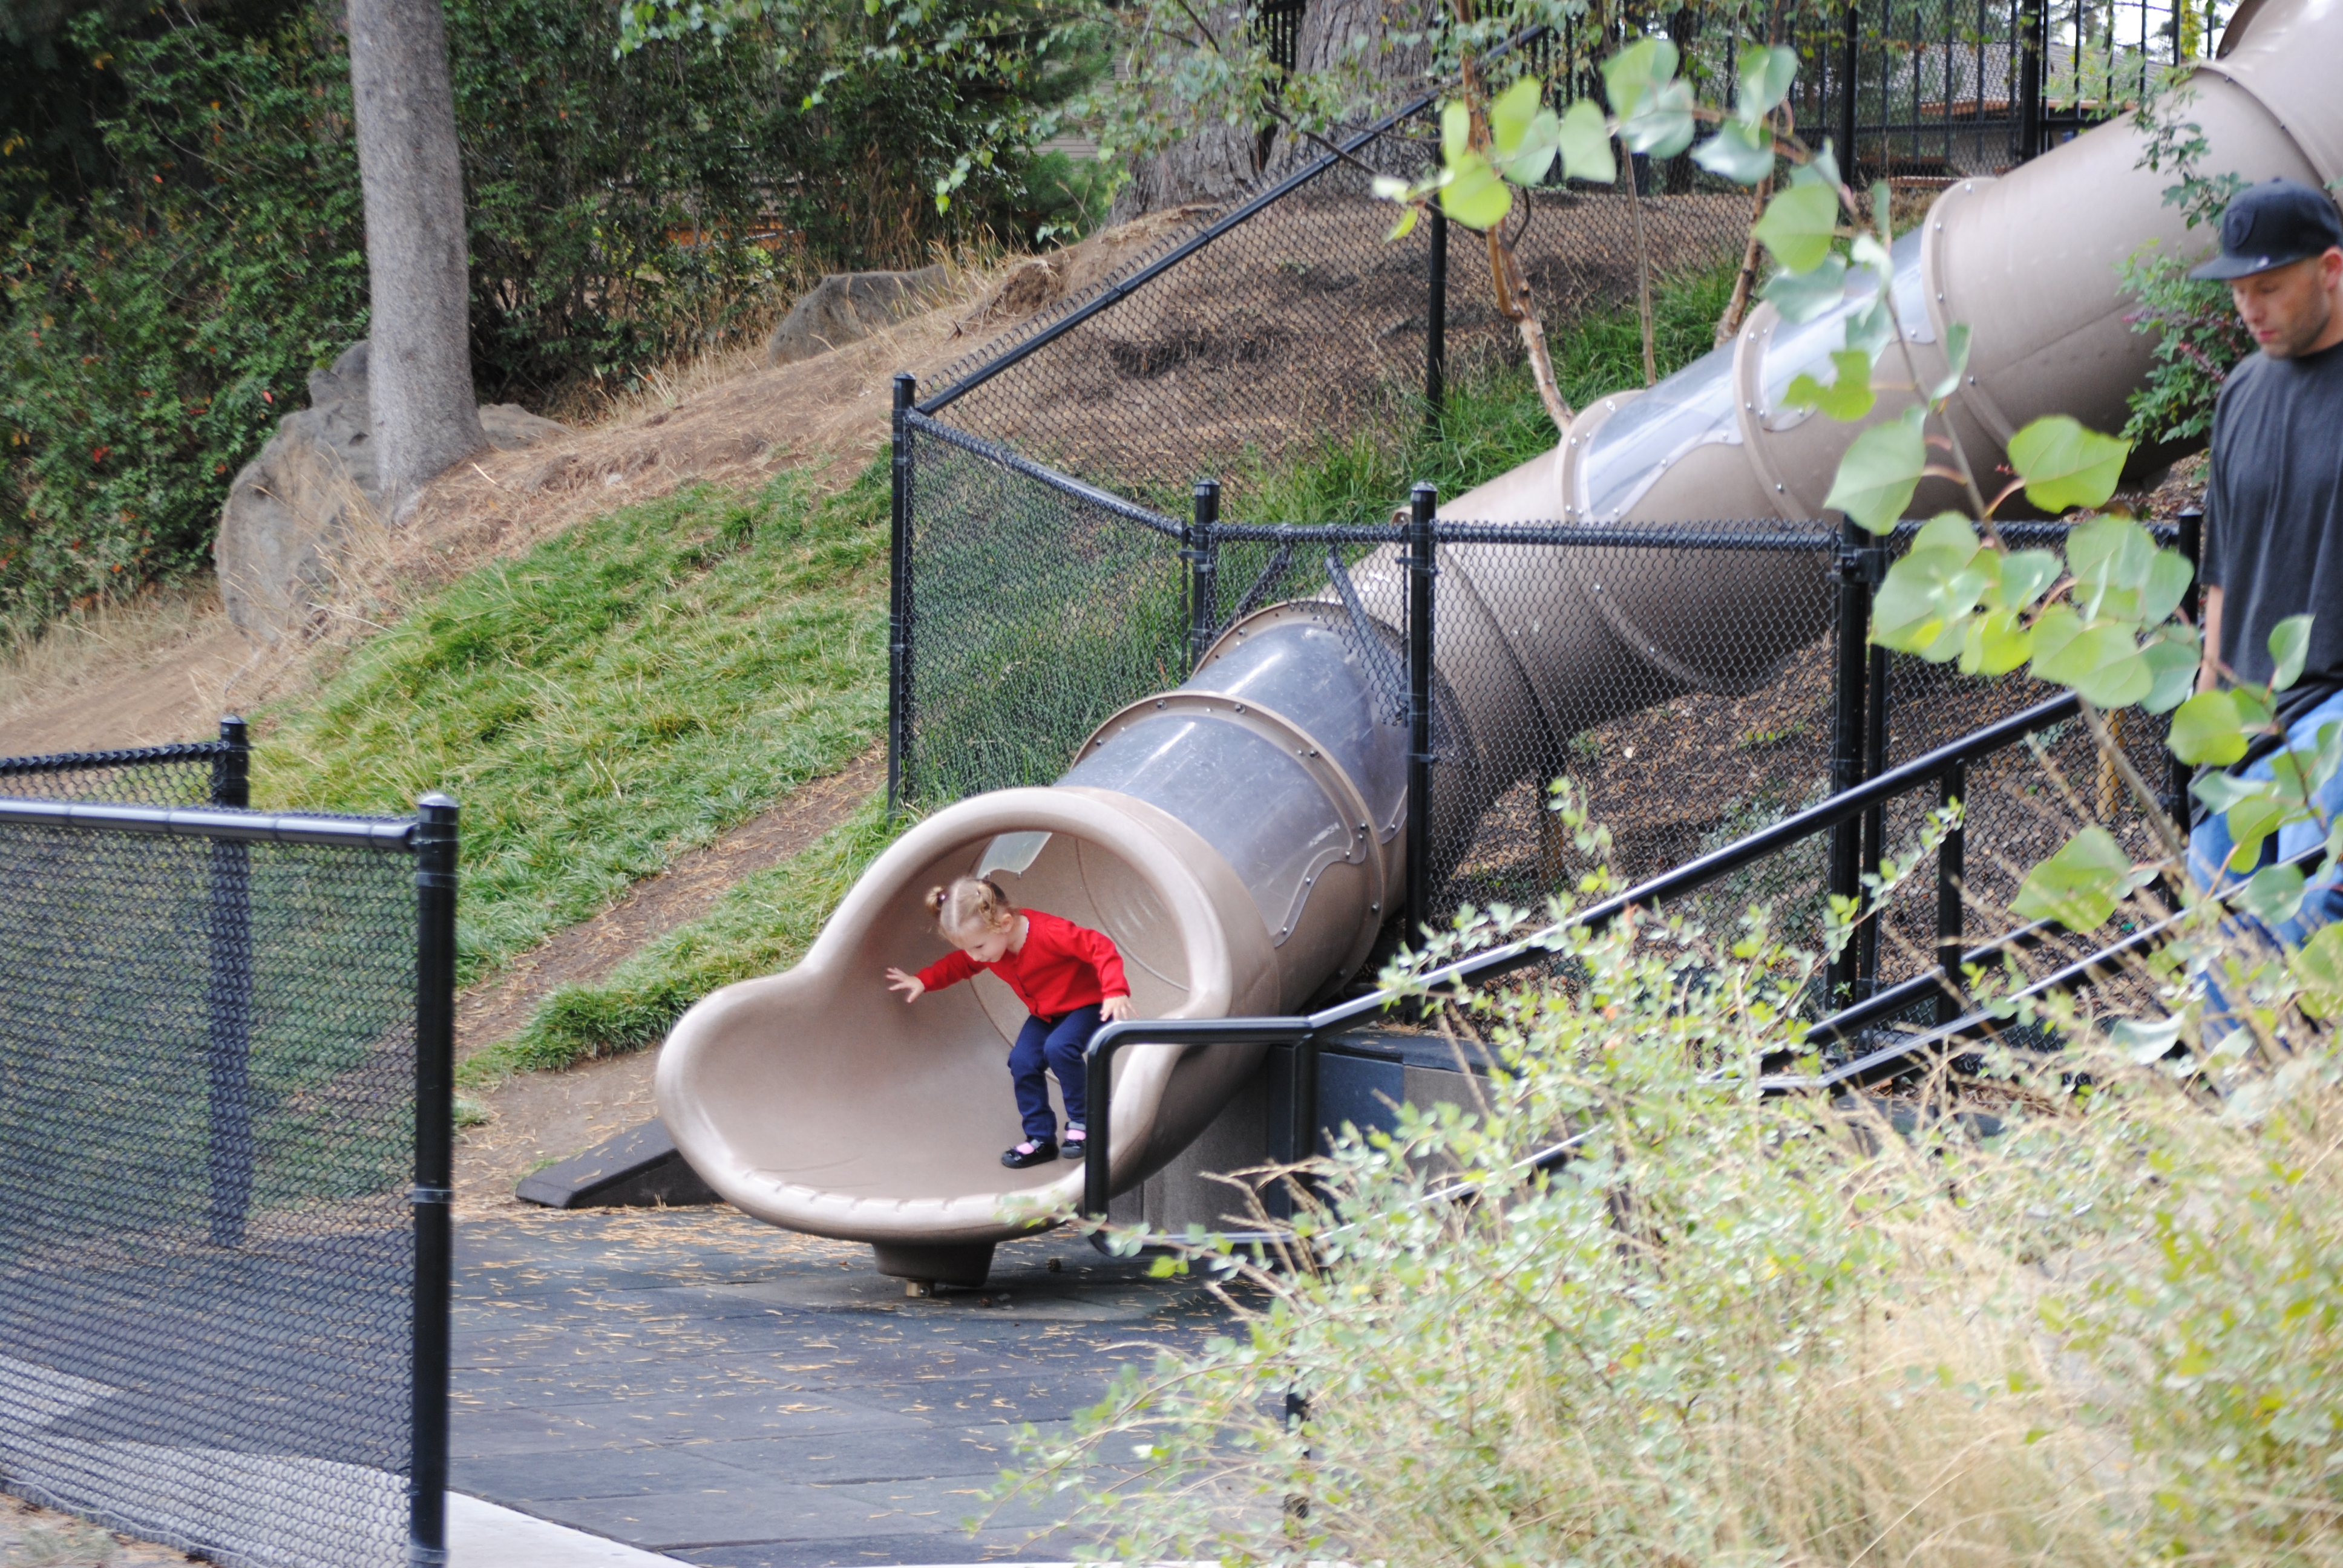 A child coming out of a tube slide at Columbia Park.